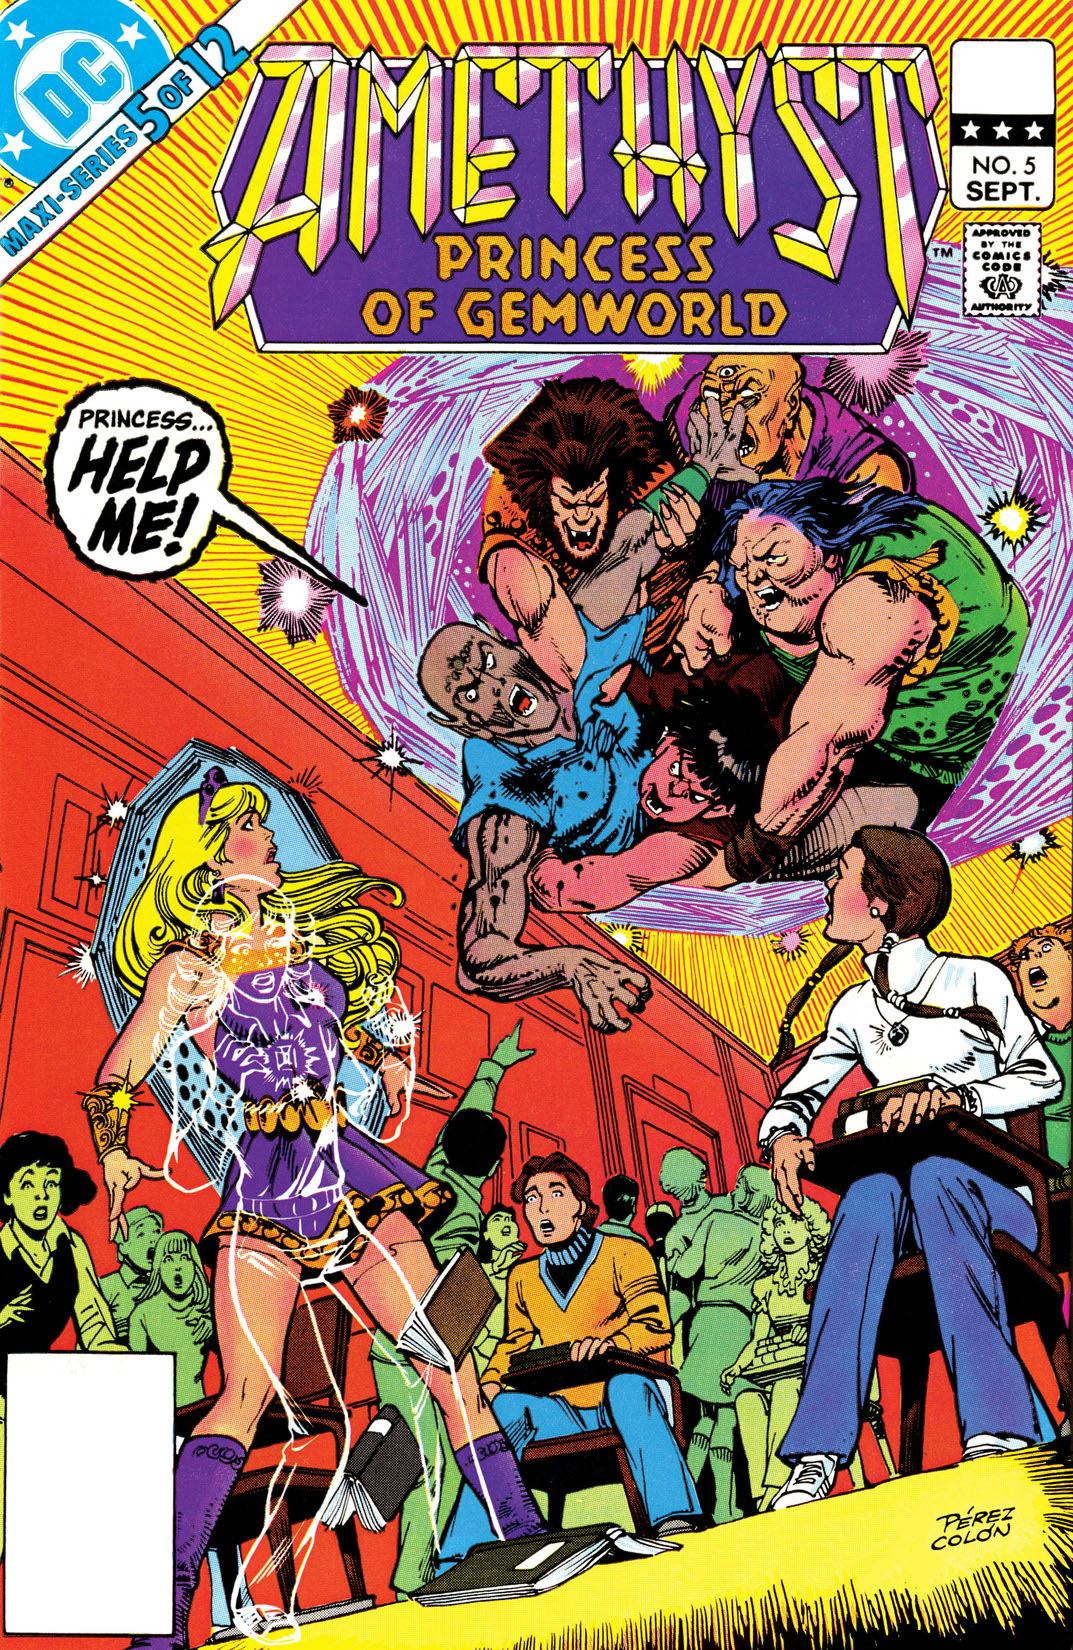 Amethyst: Princess of Gemworld (1983-) #5 preview images